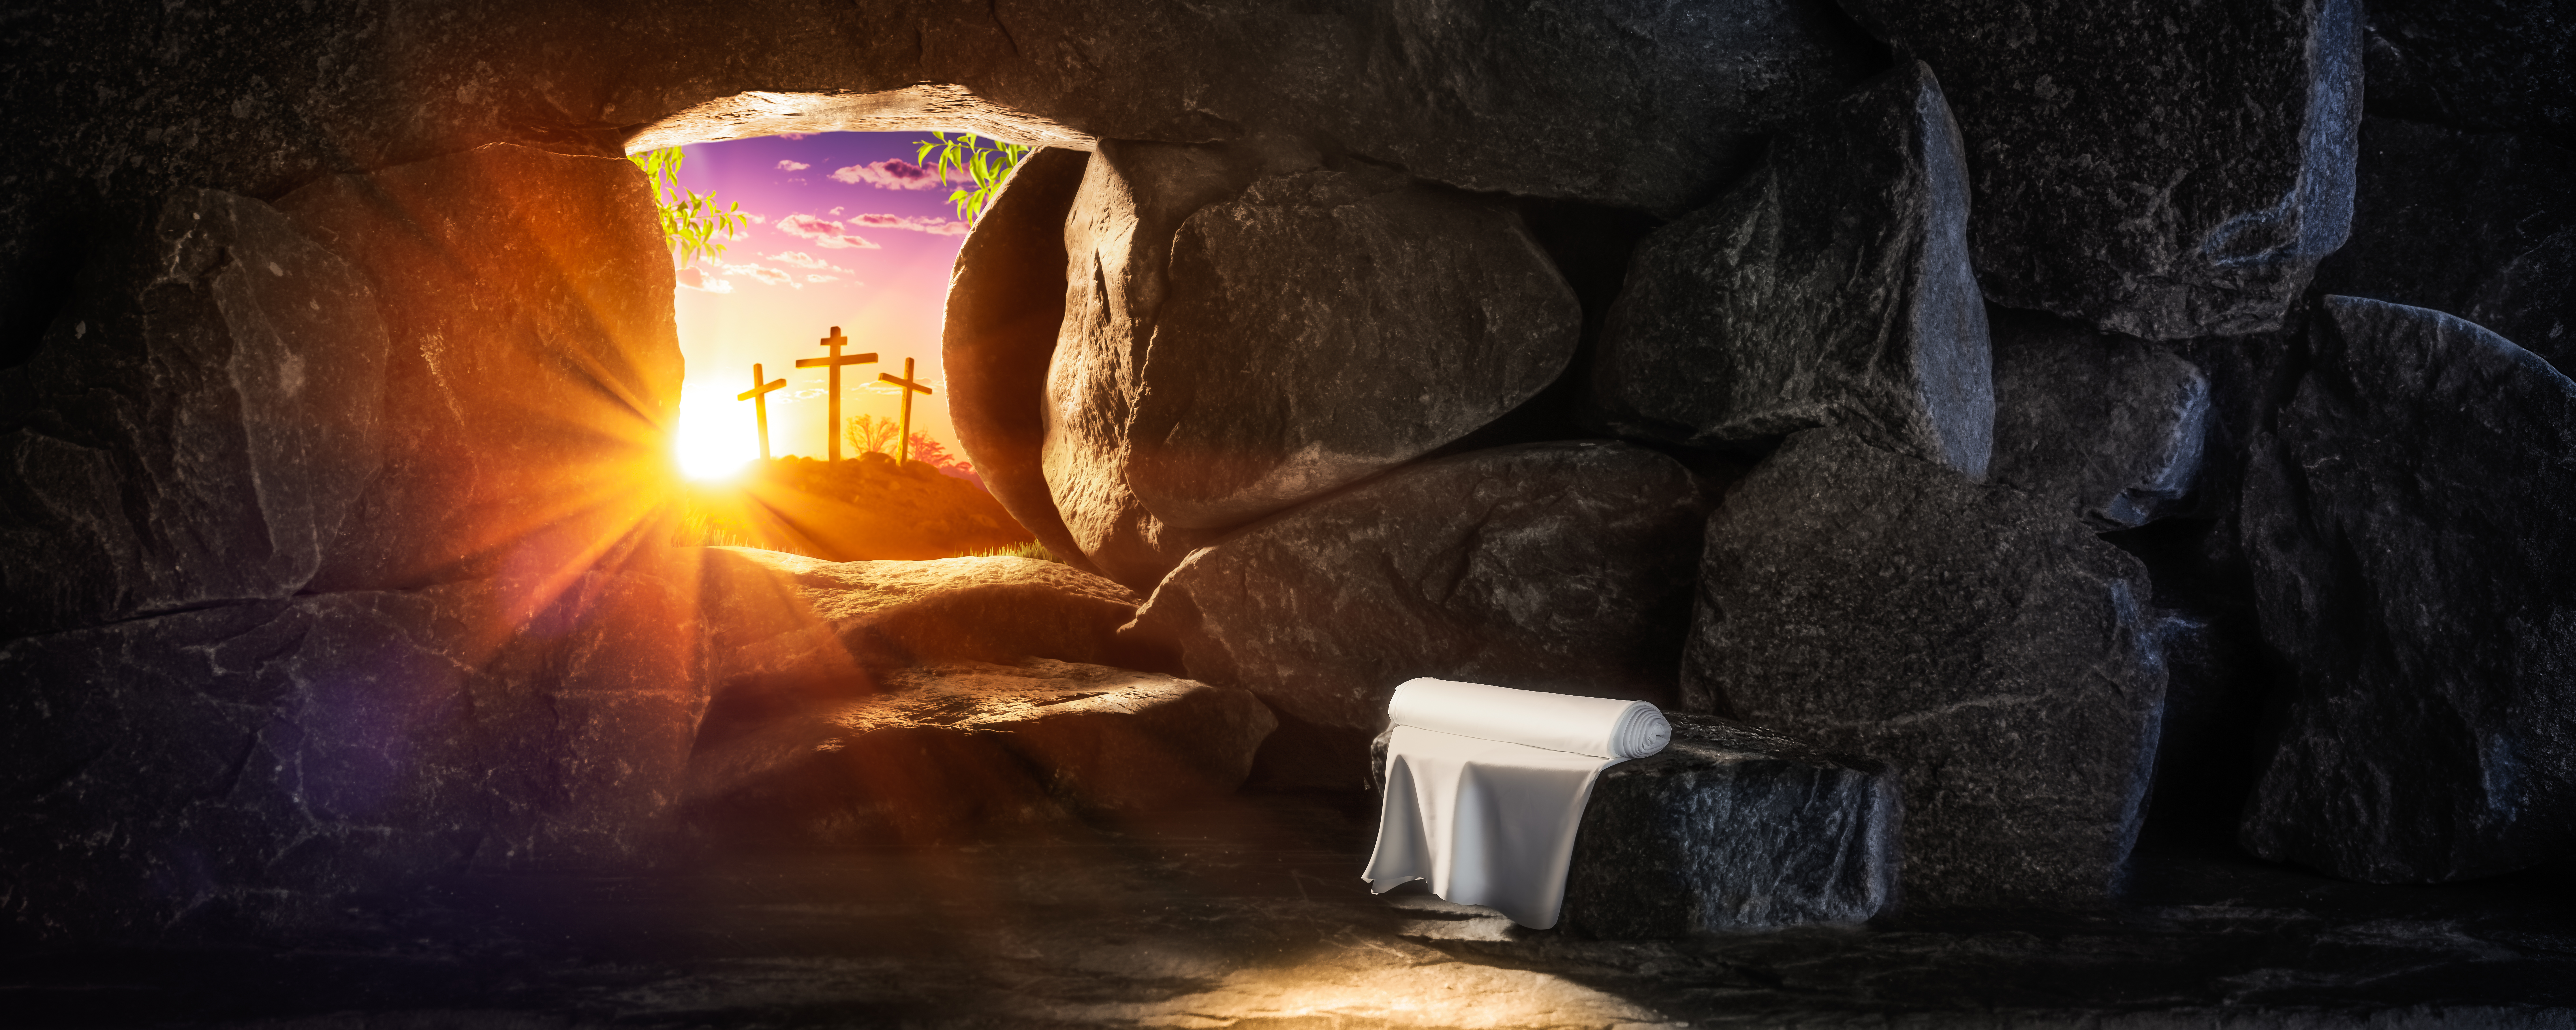 Easter Monday - Family Reflection Video